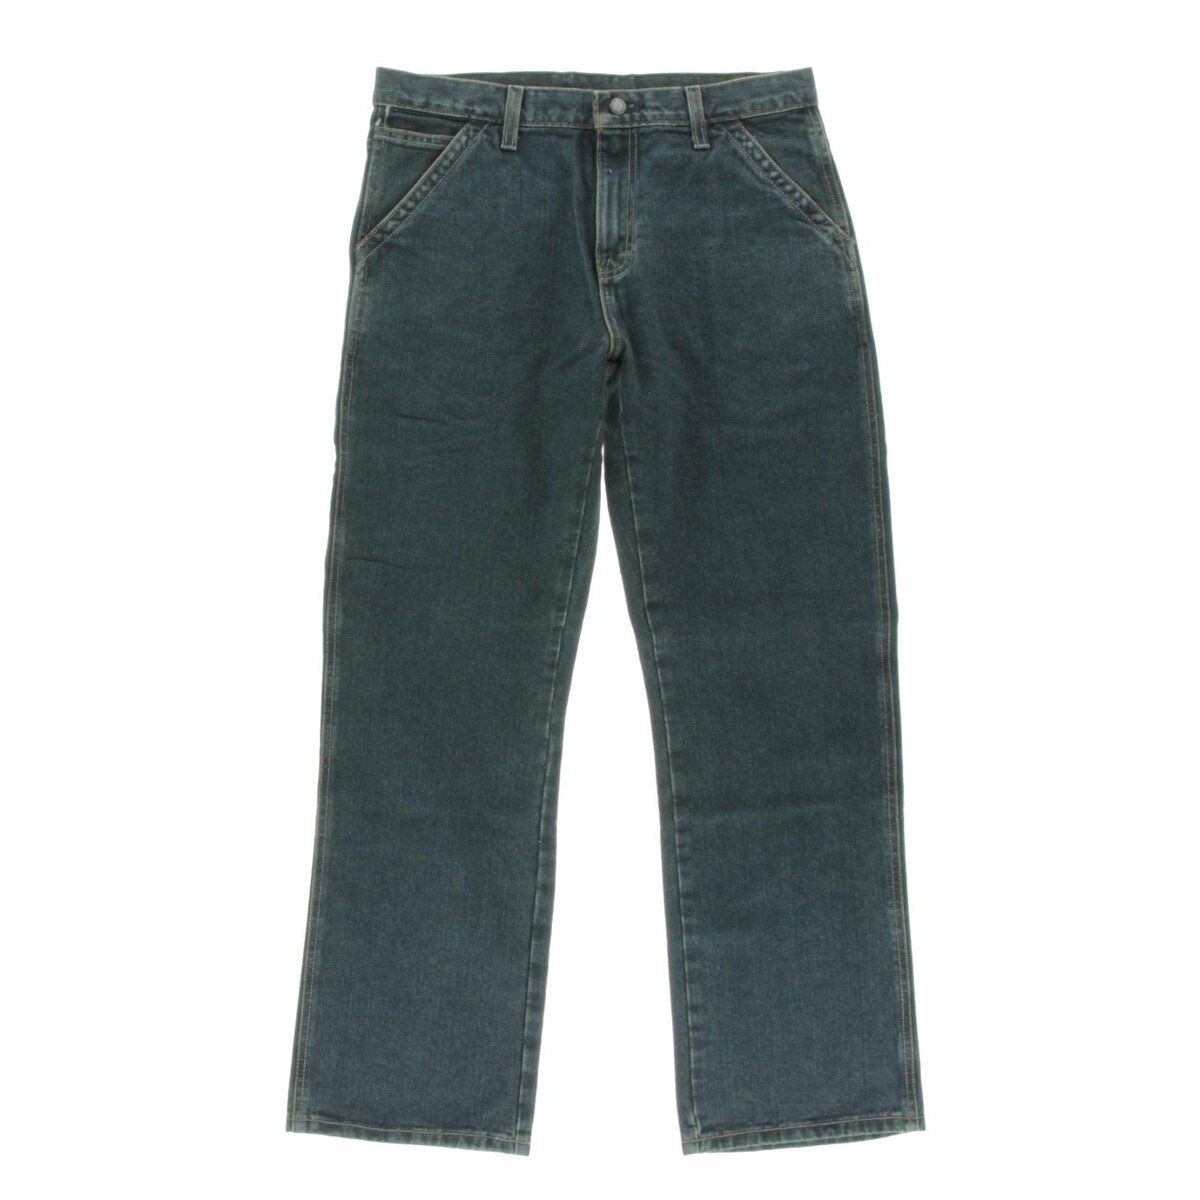 mens bootcut work jeans